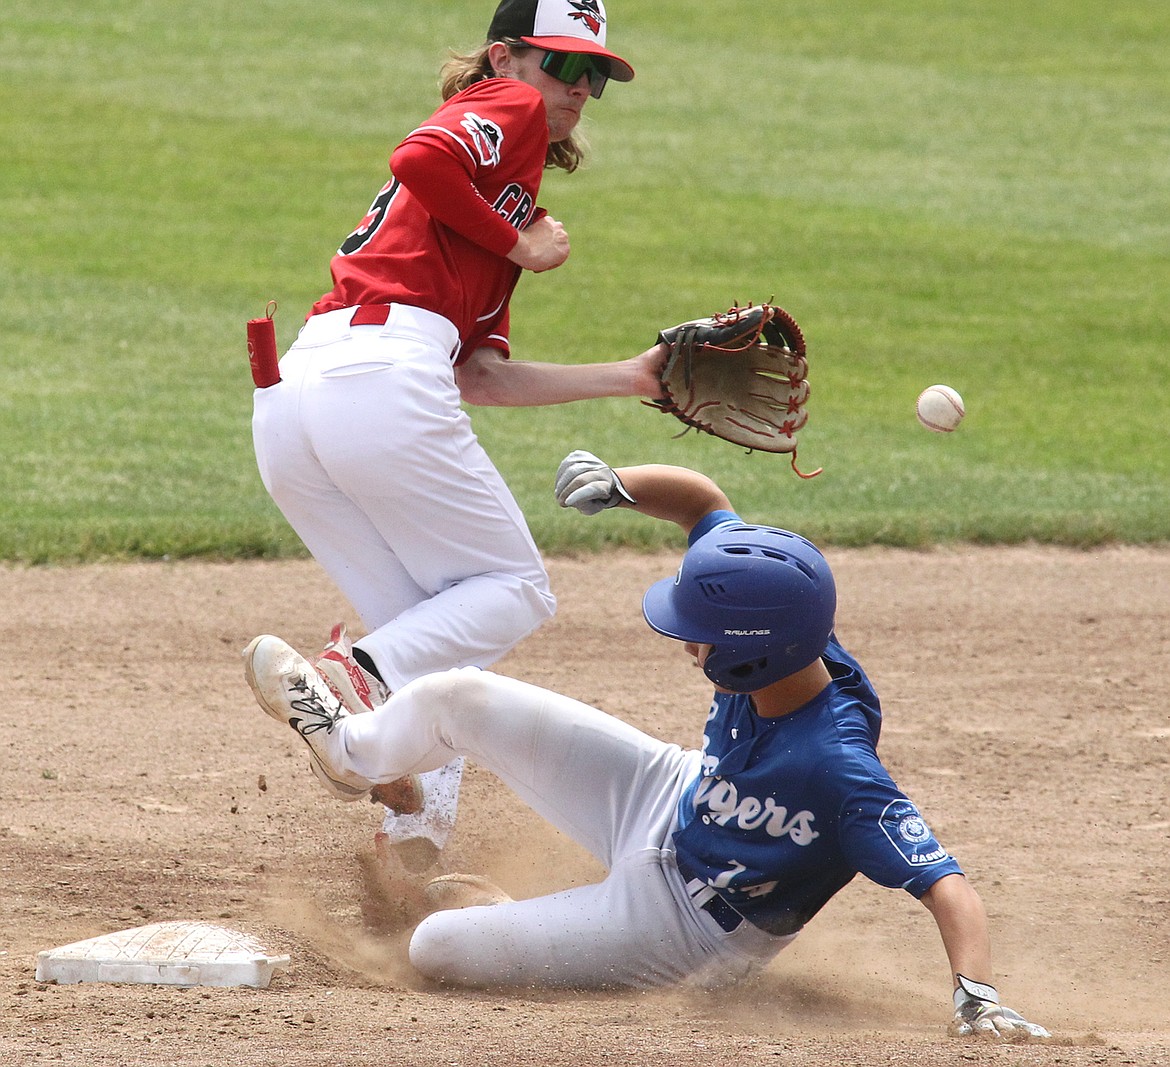 Libby Loggers Legion player Brody Gilmore slips under the throw to Cranbrook Bandits second baseman Brantley Johnson to steal second base in the bottom of the second inning in the first game of a doubleheader Saturday at Lee Gehring Field. The Bandits won, 10-4. (Paul Sievers/The Western News)